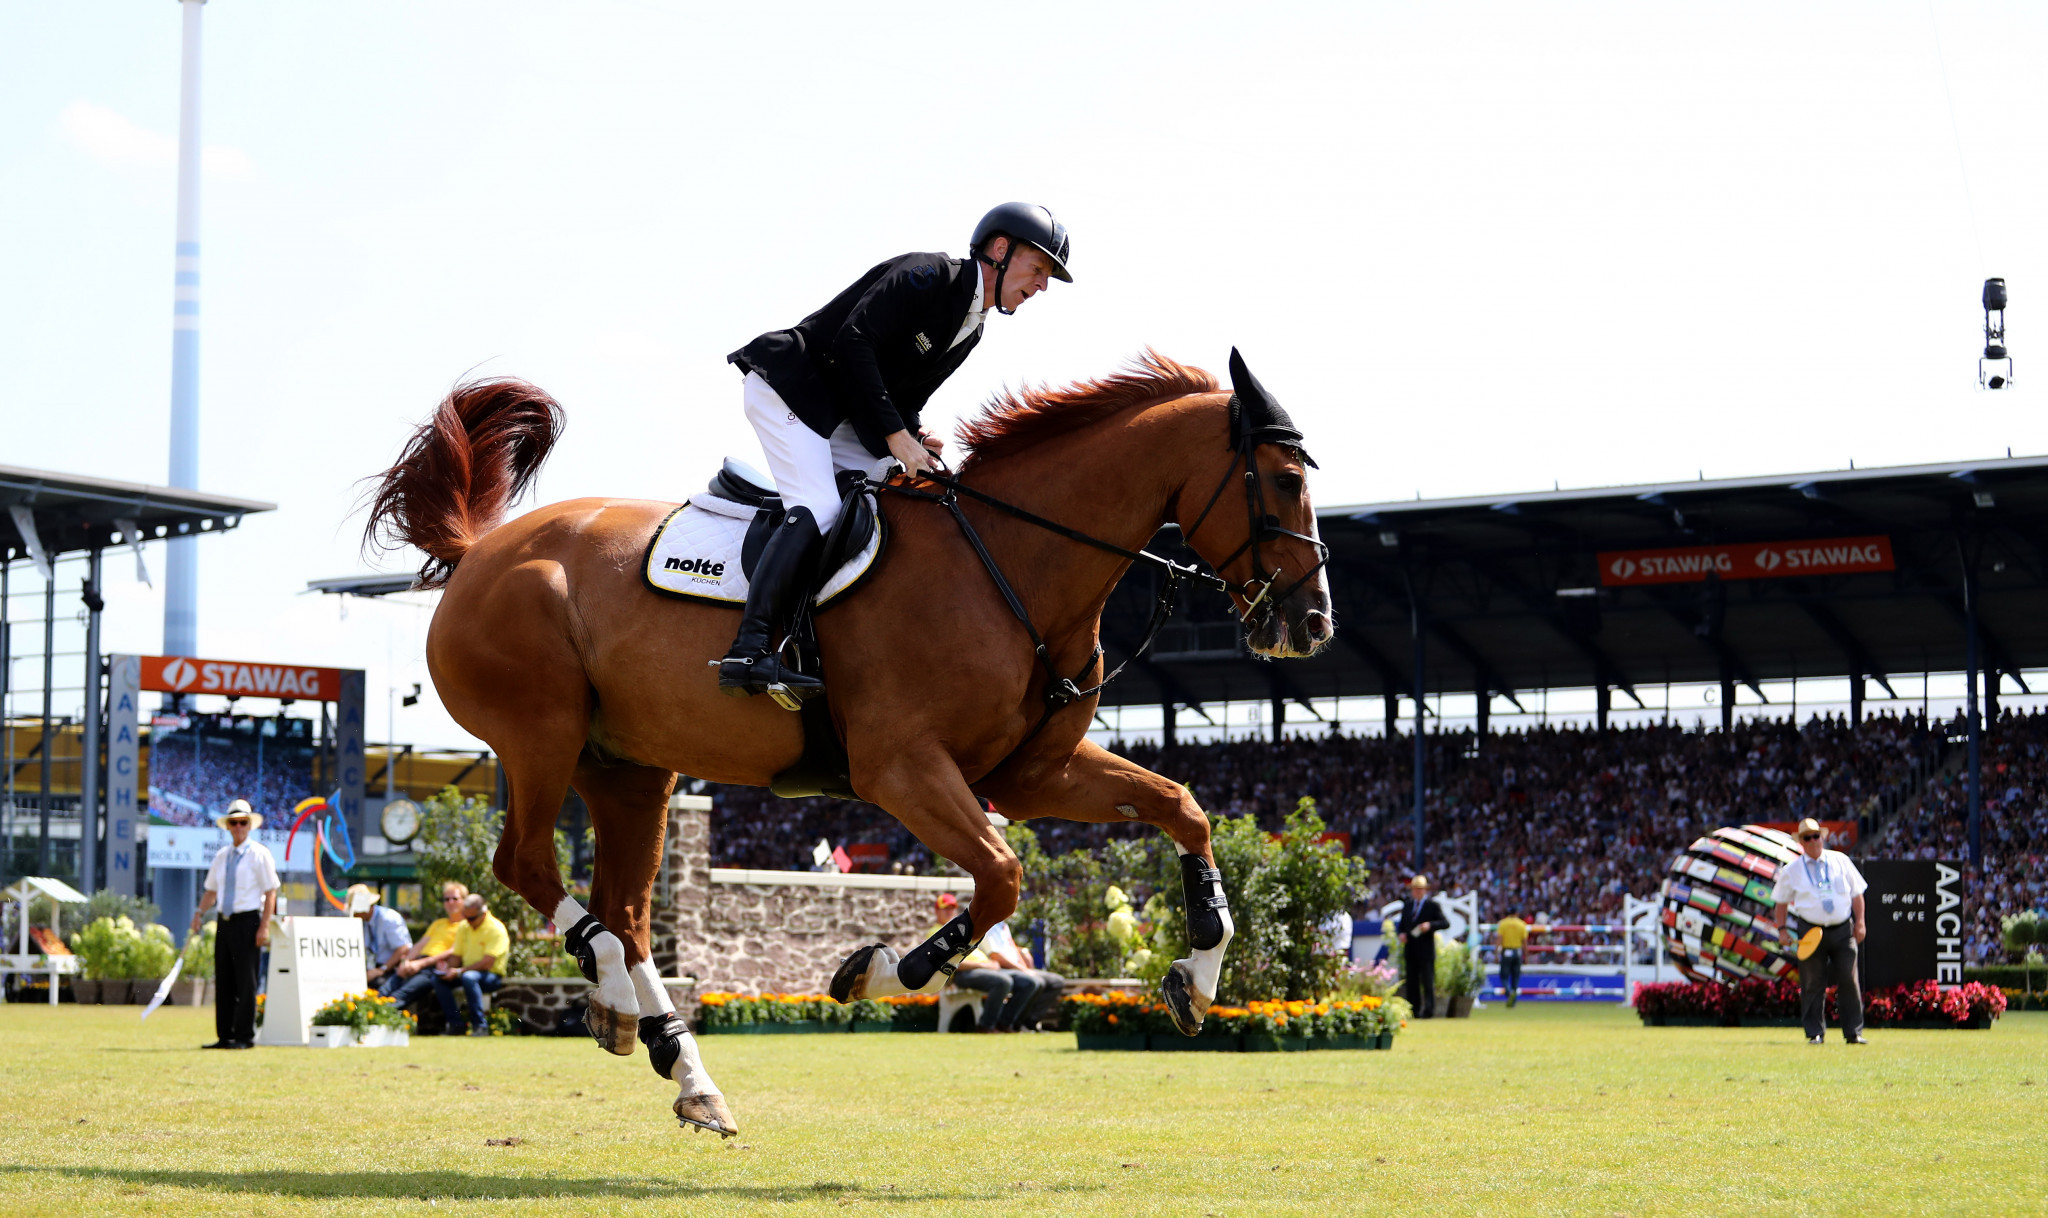 Germany wins Challenge Cup at FEI Jumping Nations Cup Final